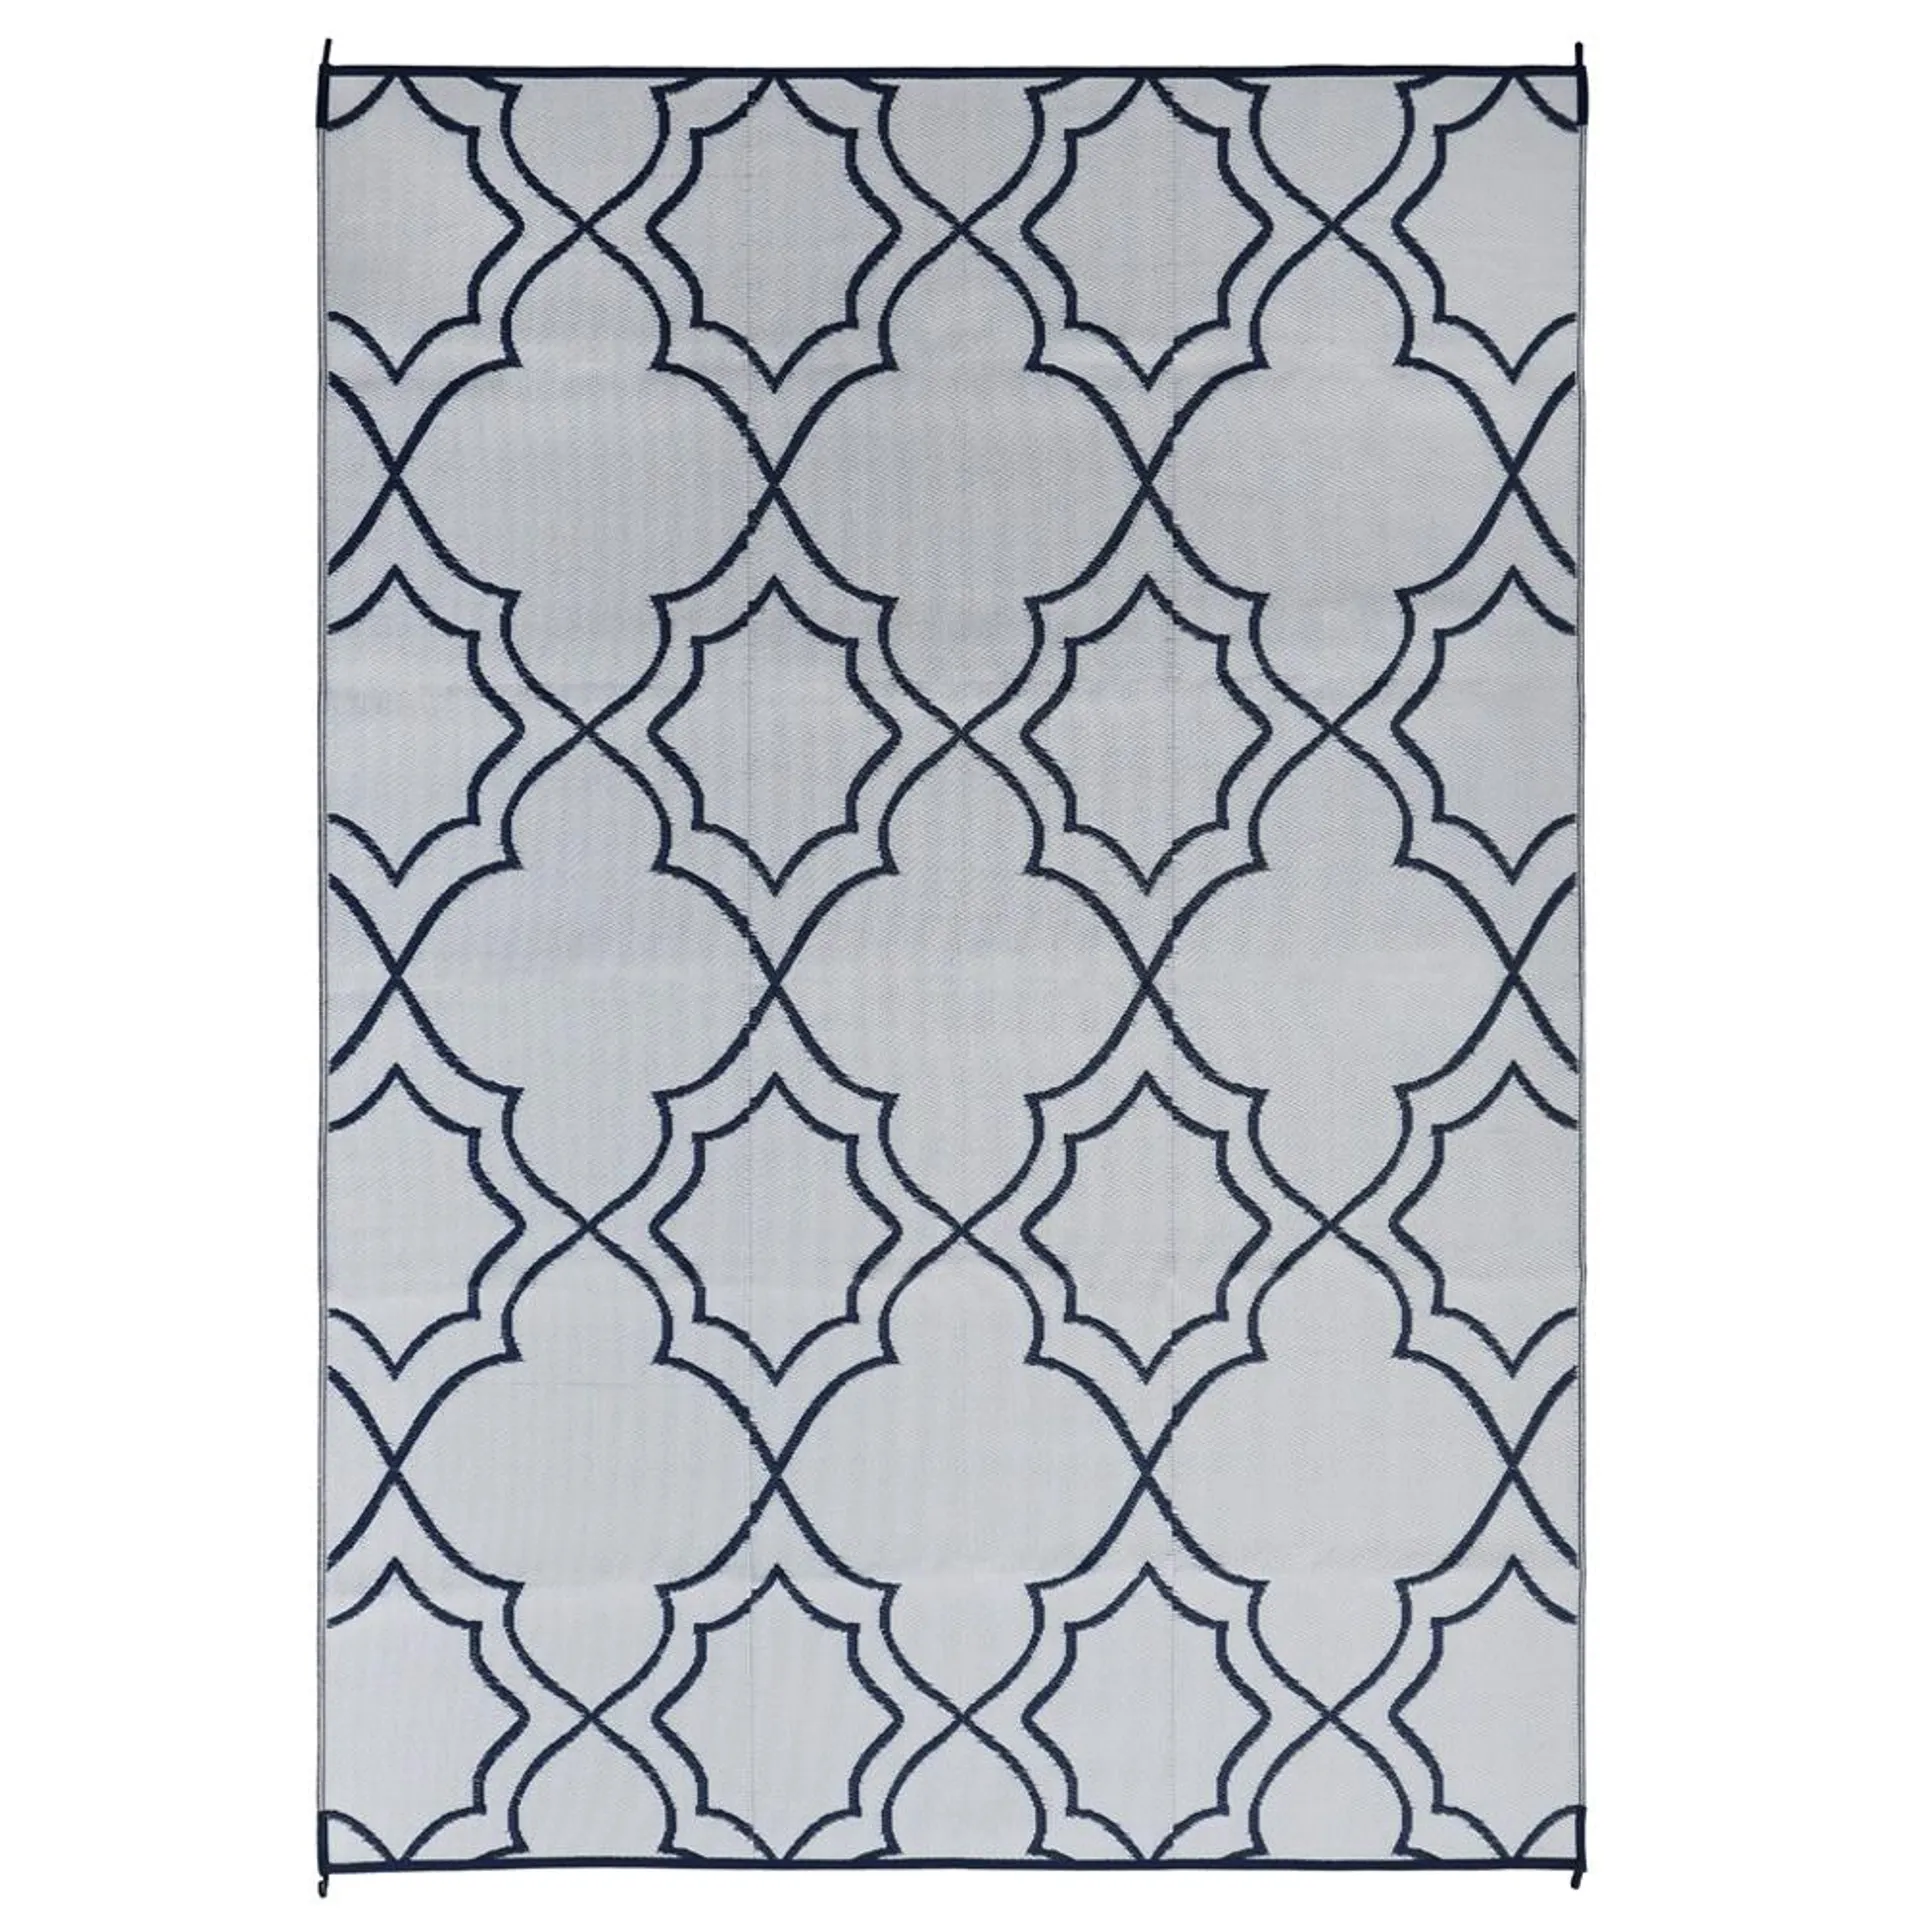 Outdoor Living Accents 9’ x 12’ Reversible Patio Rug